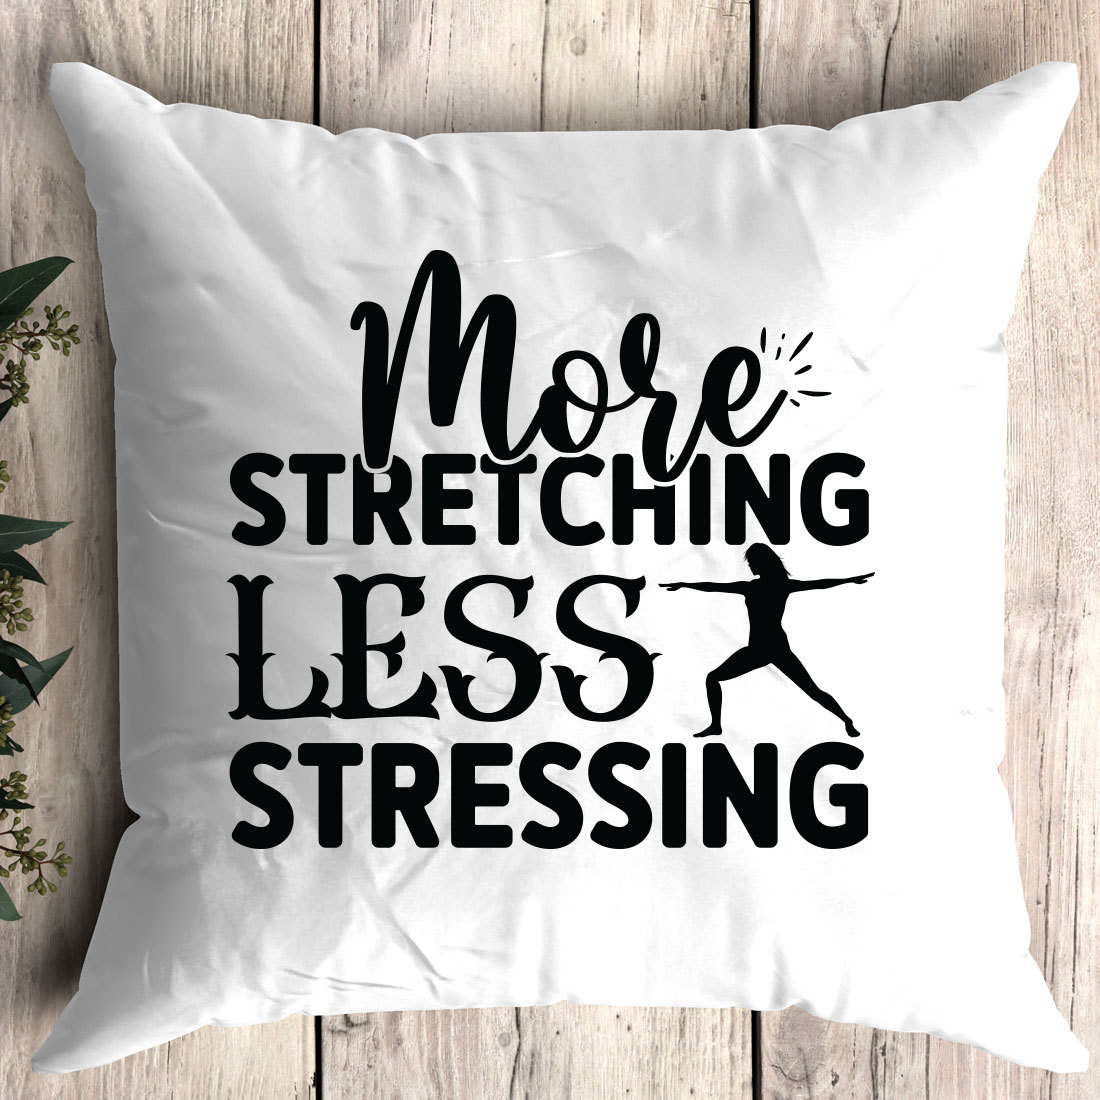 White pillow that says more stretching less stressing.